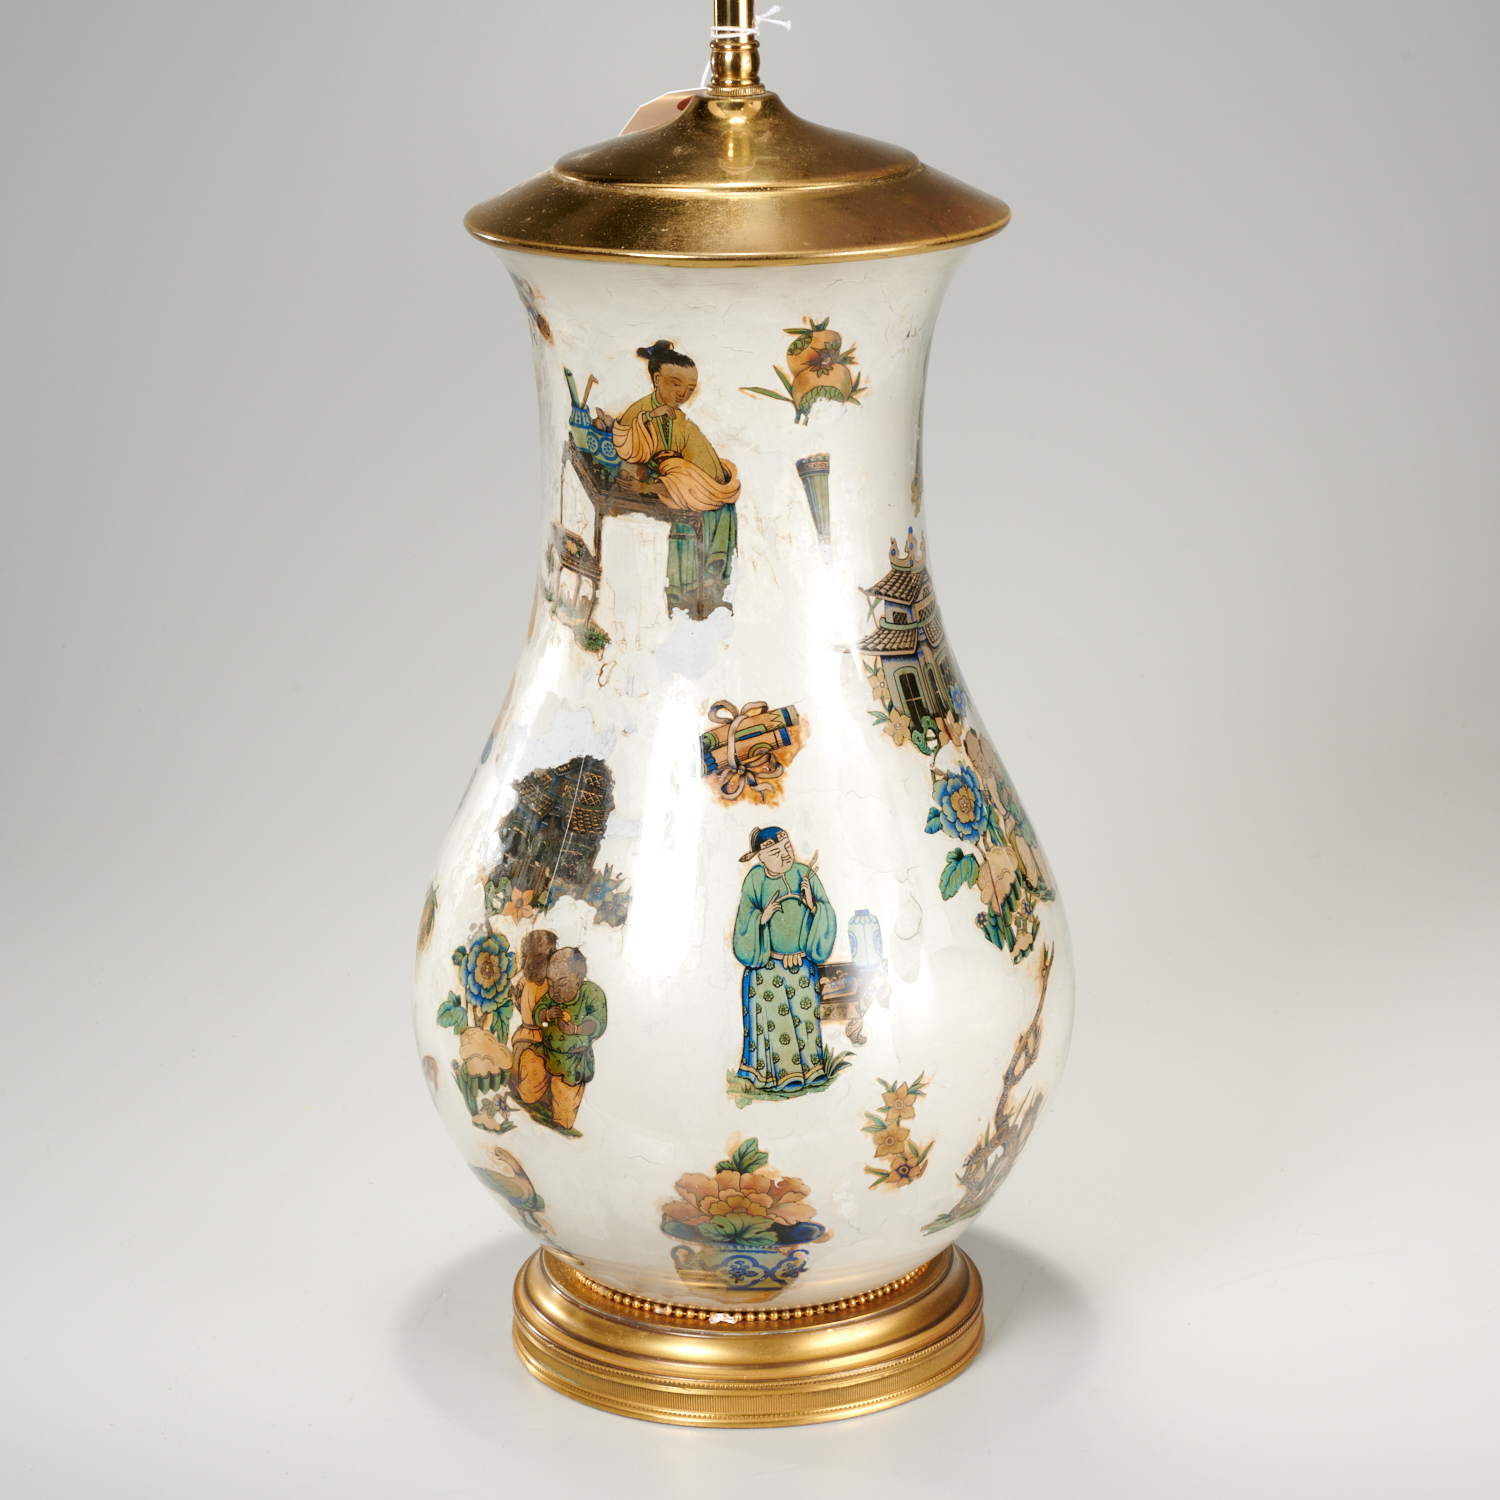 CHINOISERIE DECALOMANIA TABLE LAMP 20th